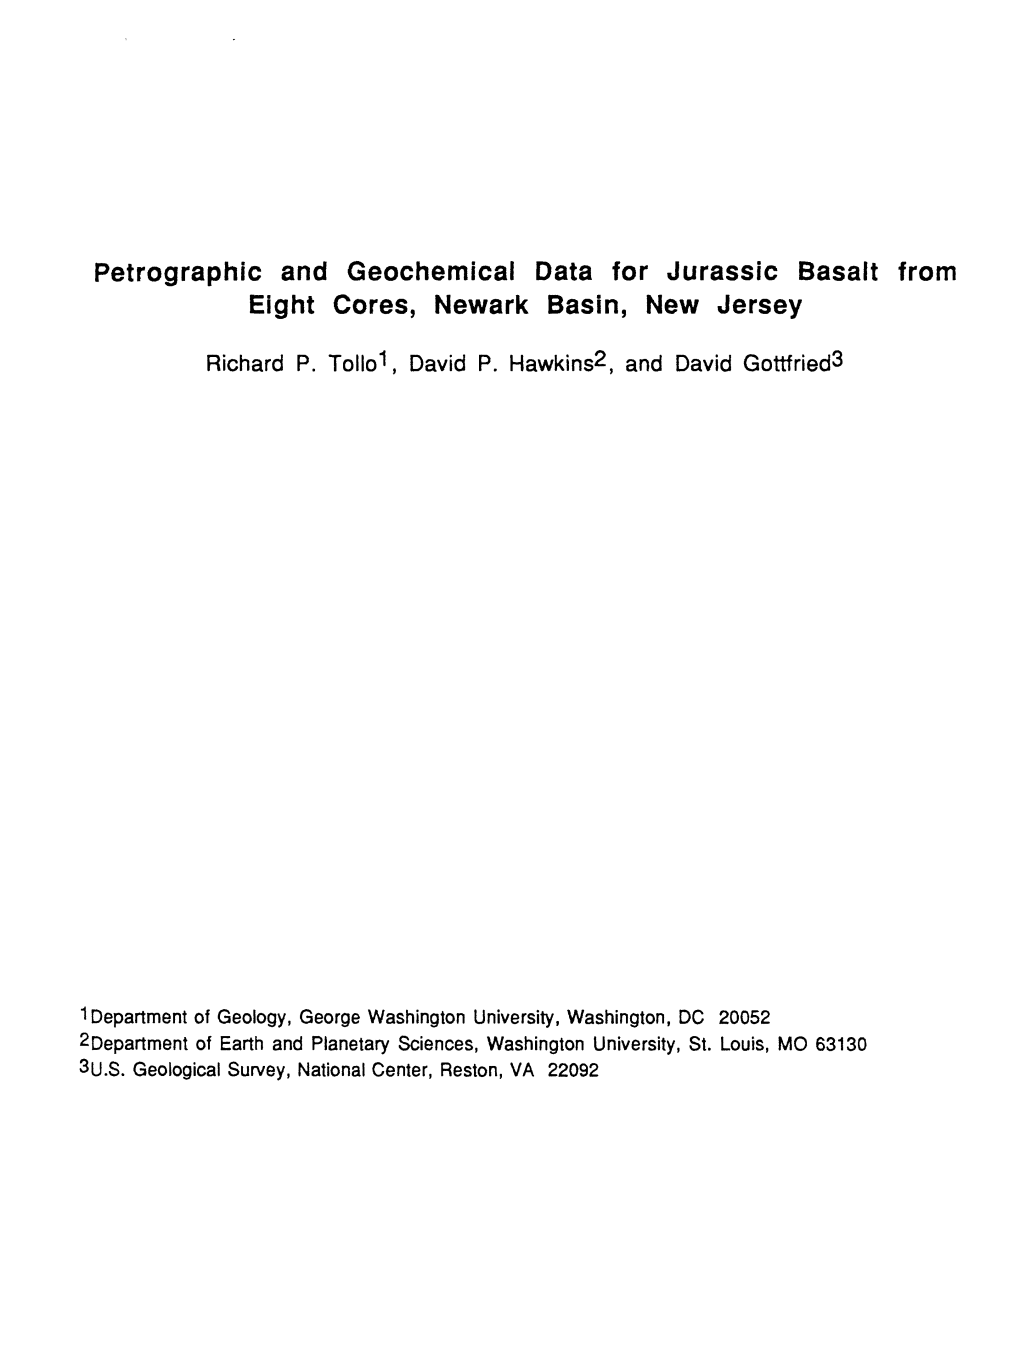 Petrographic and Geochemical Data for Jurassic Basalt from Eight Cores, Newark Basin, New Jersey